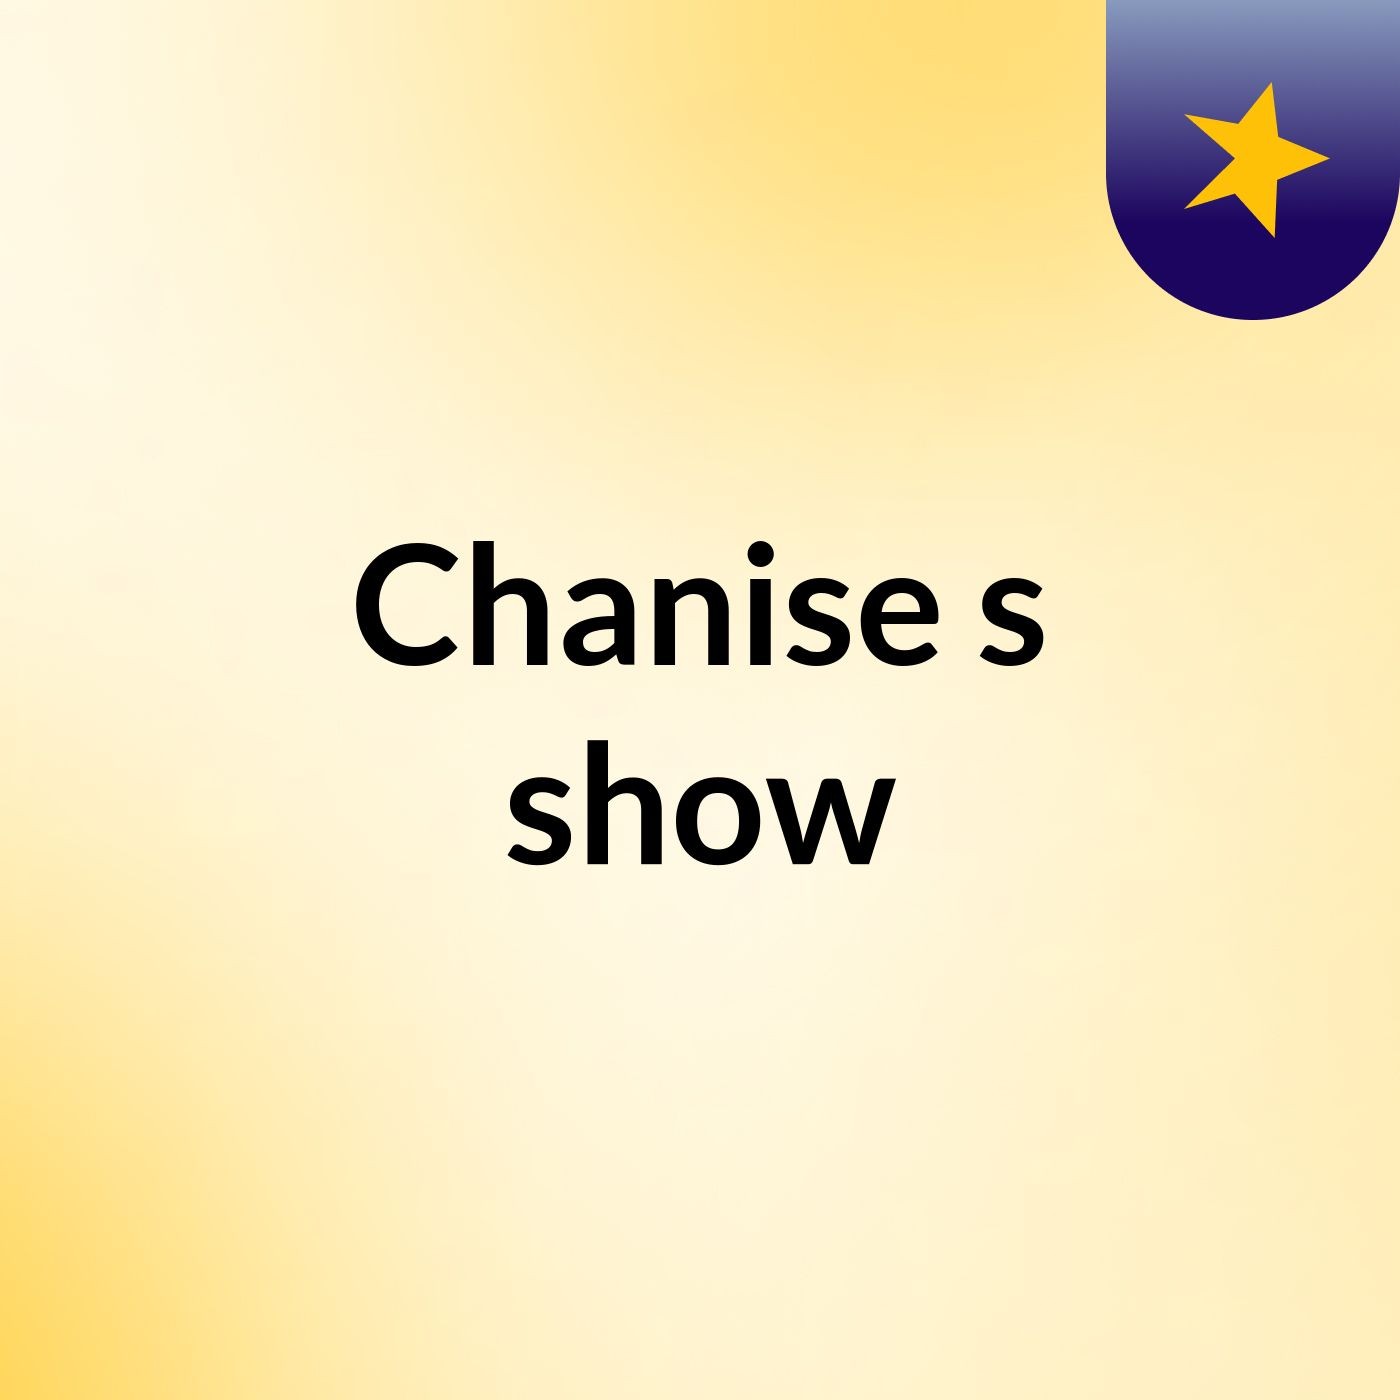 Chanise's show